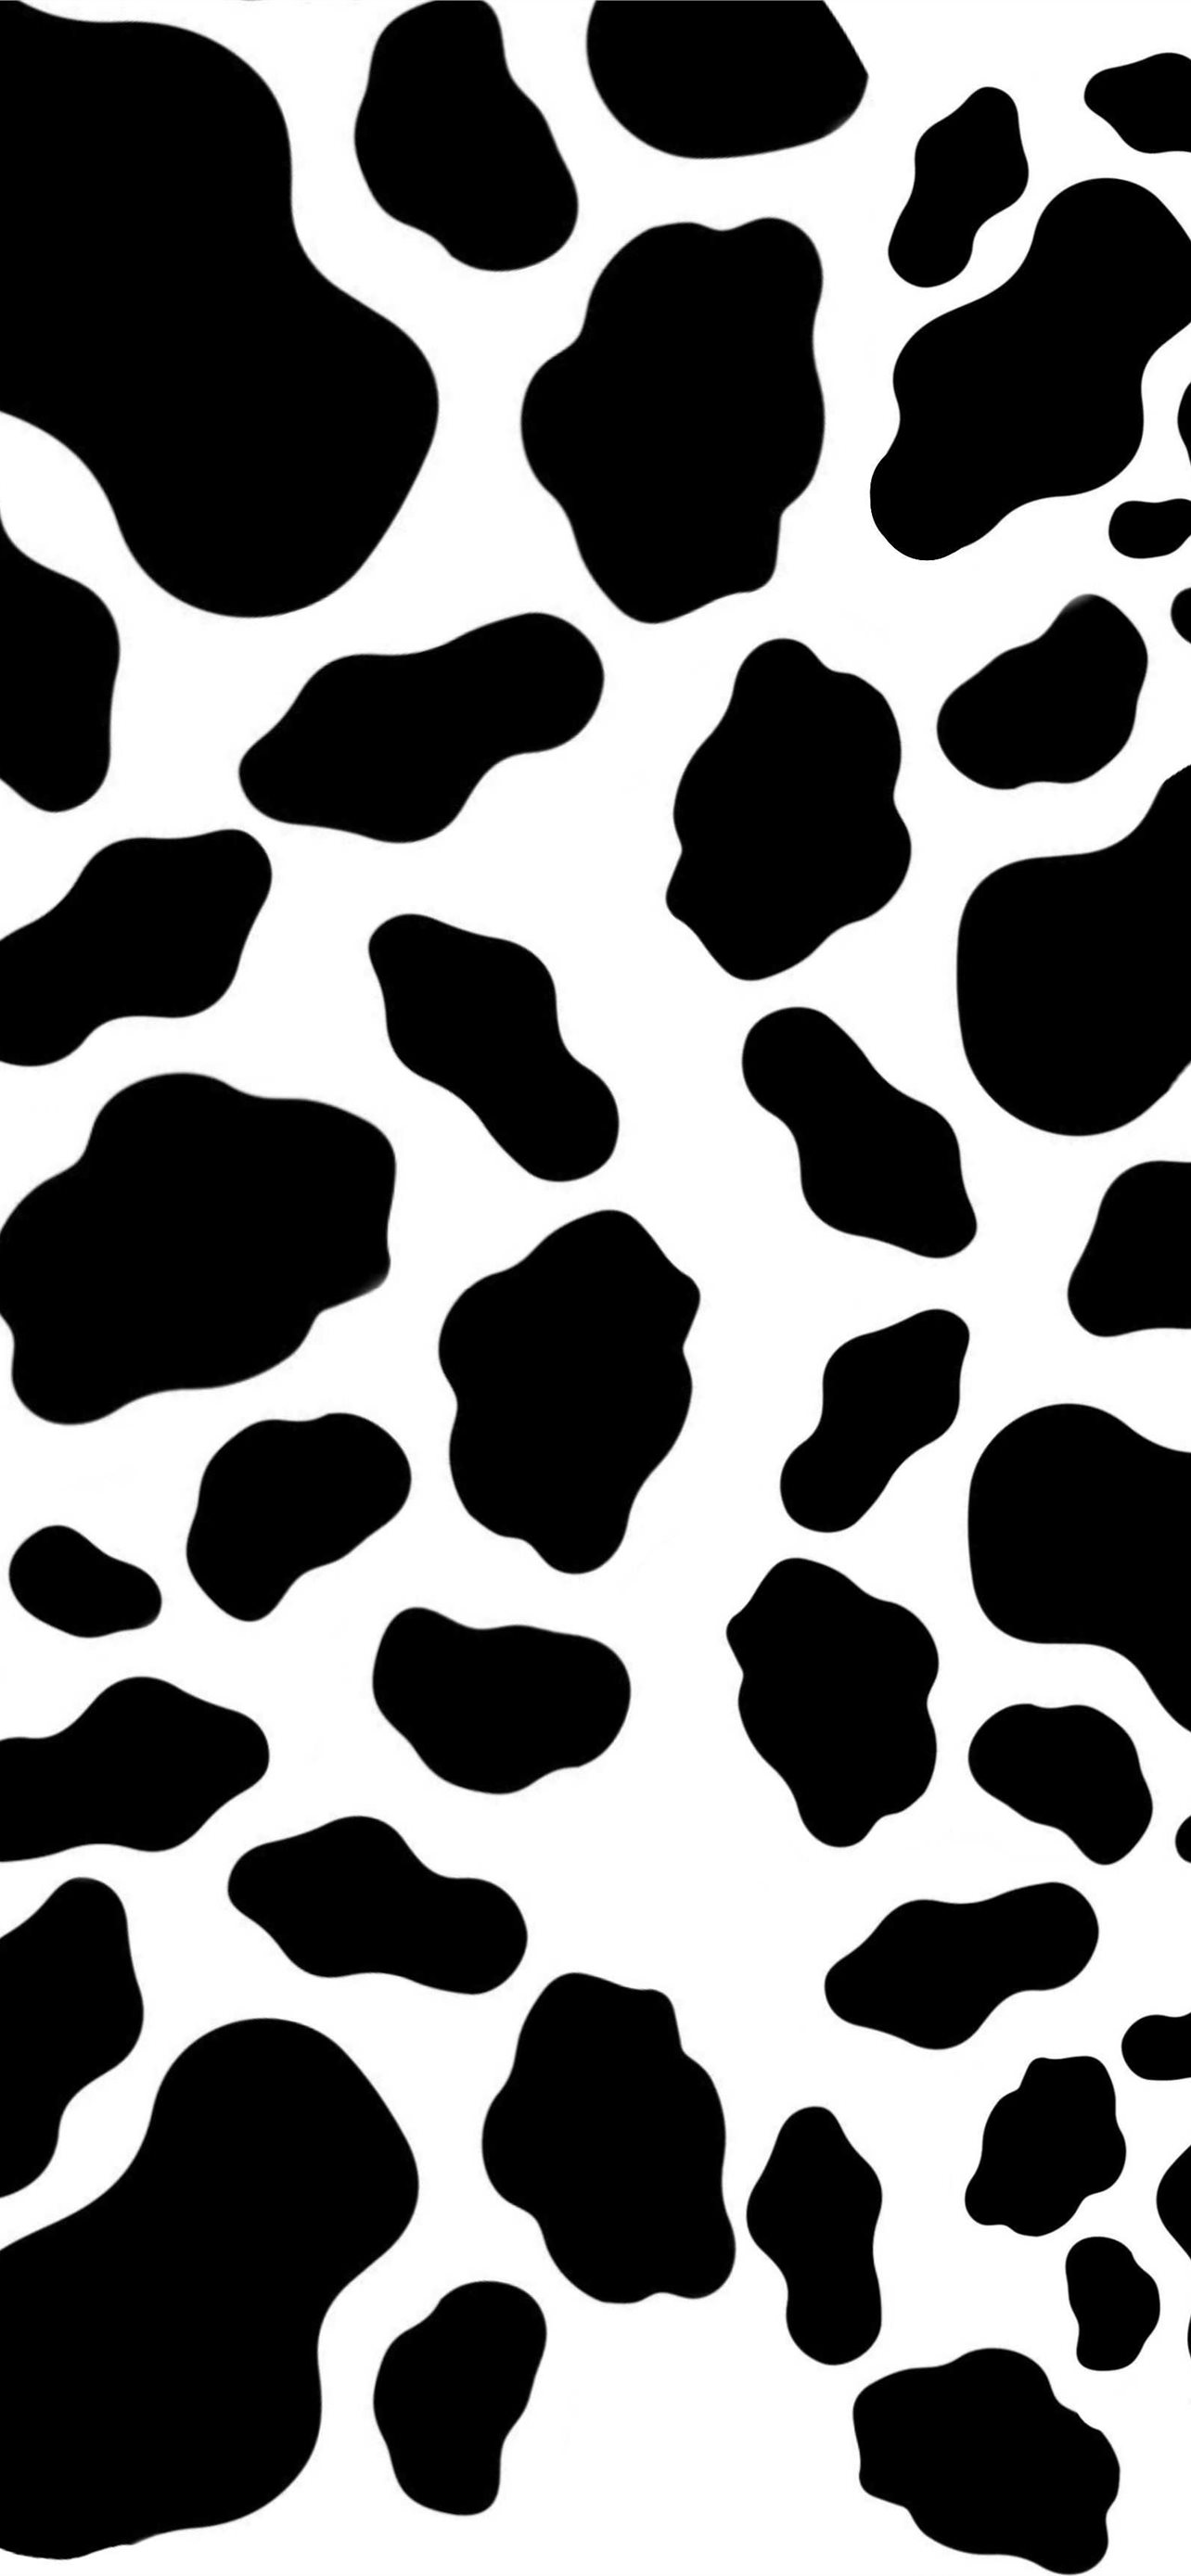 Sparkly Cow Wallpaper  Cow print wallpaper Cow wallpaper Iphone wallpaper  hipster